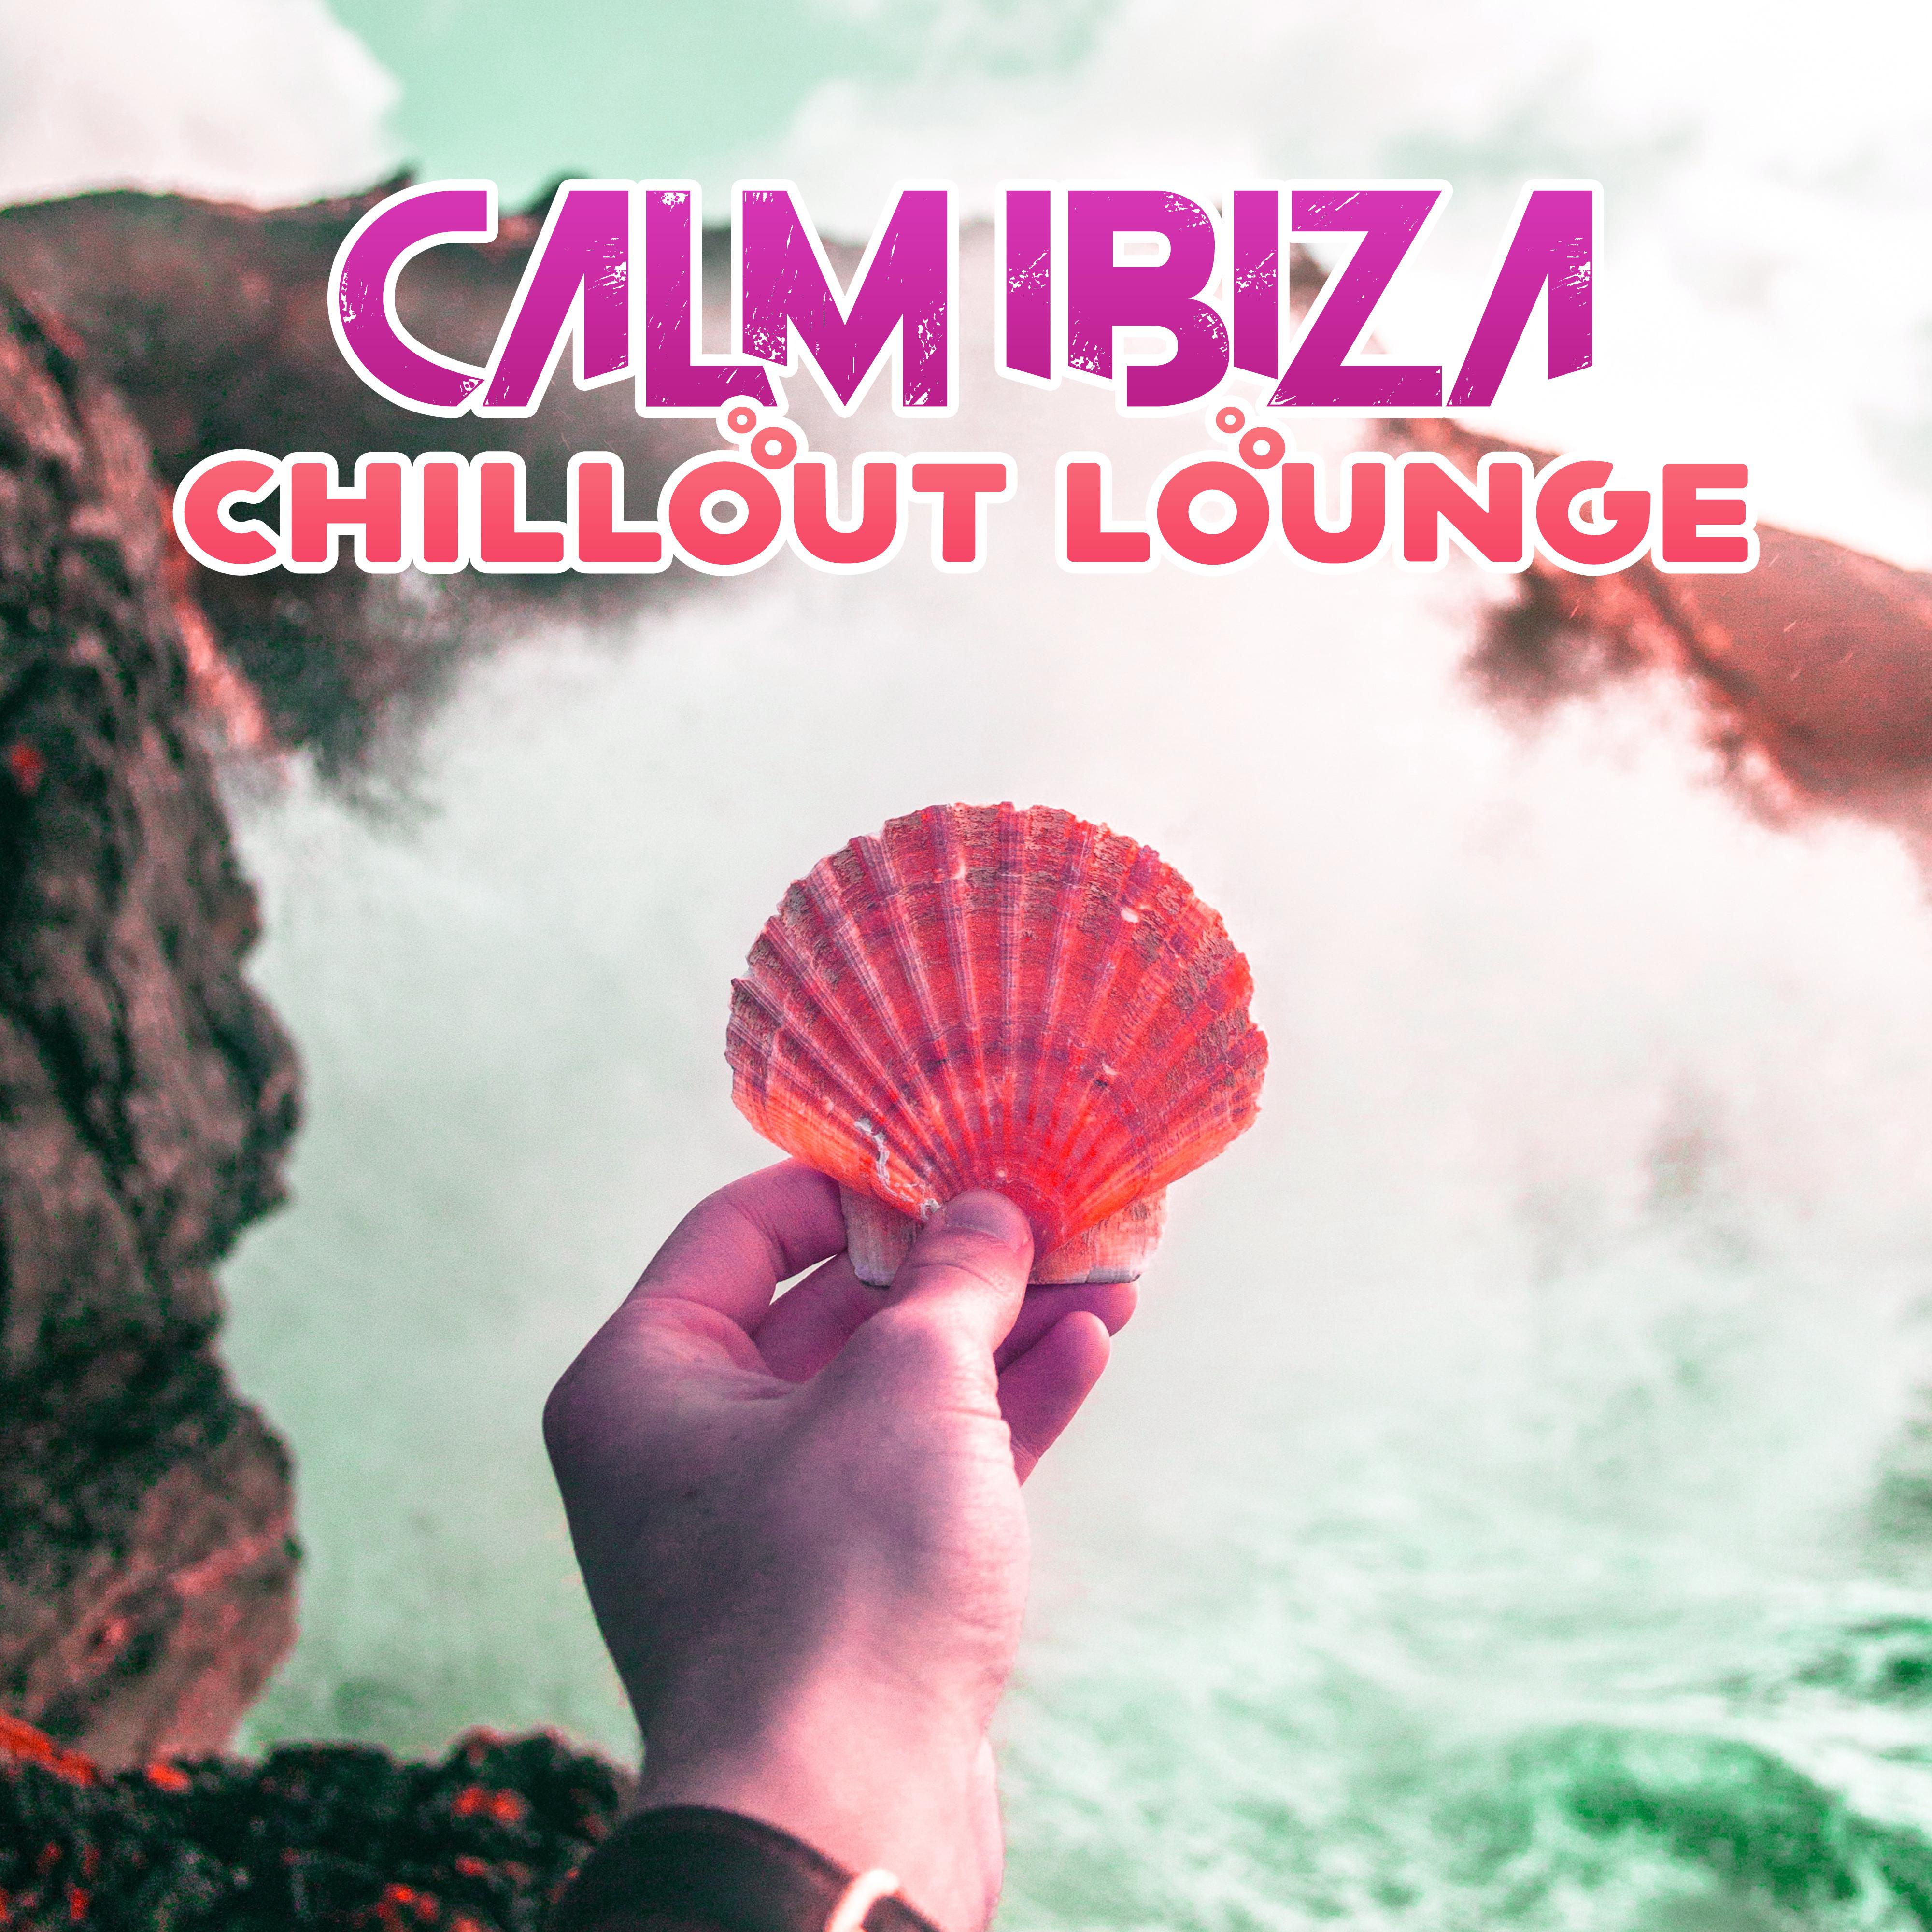 Calm Ibiza Chillout Lounge – Relaxing Time on the Beach, Summer Vibes, Chill Out 2017, Peaceful Music